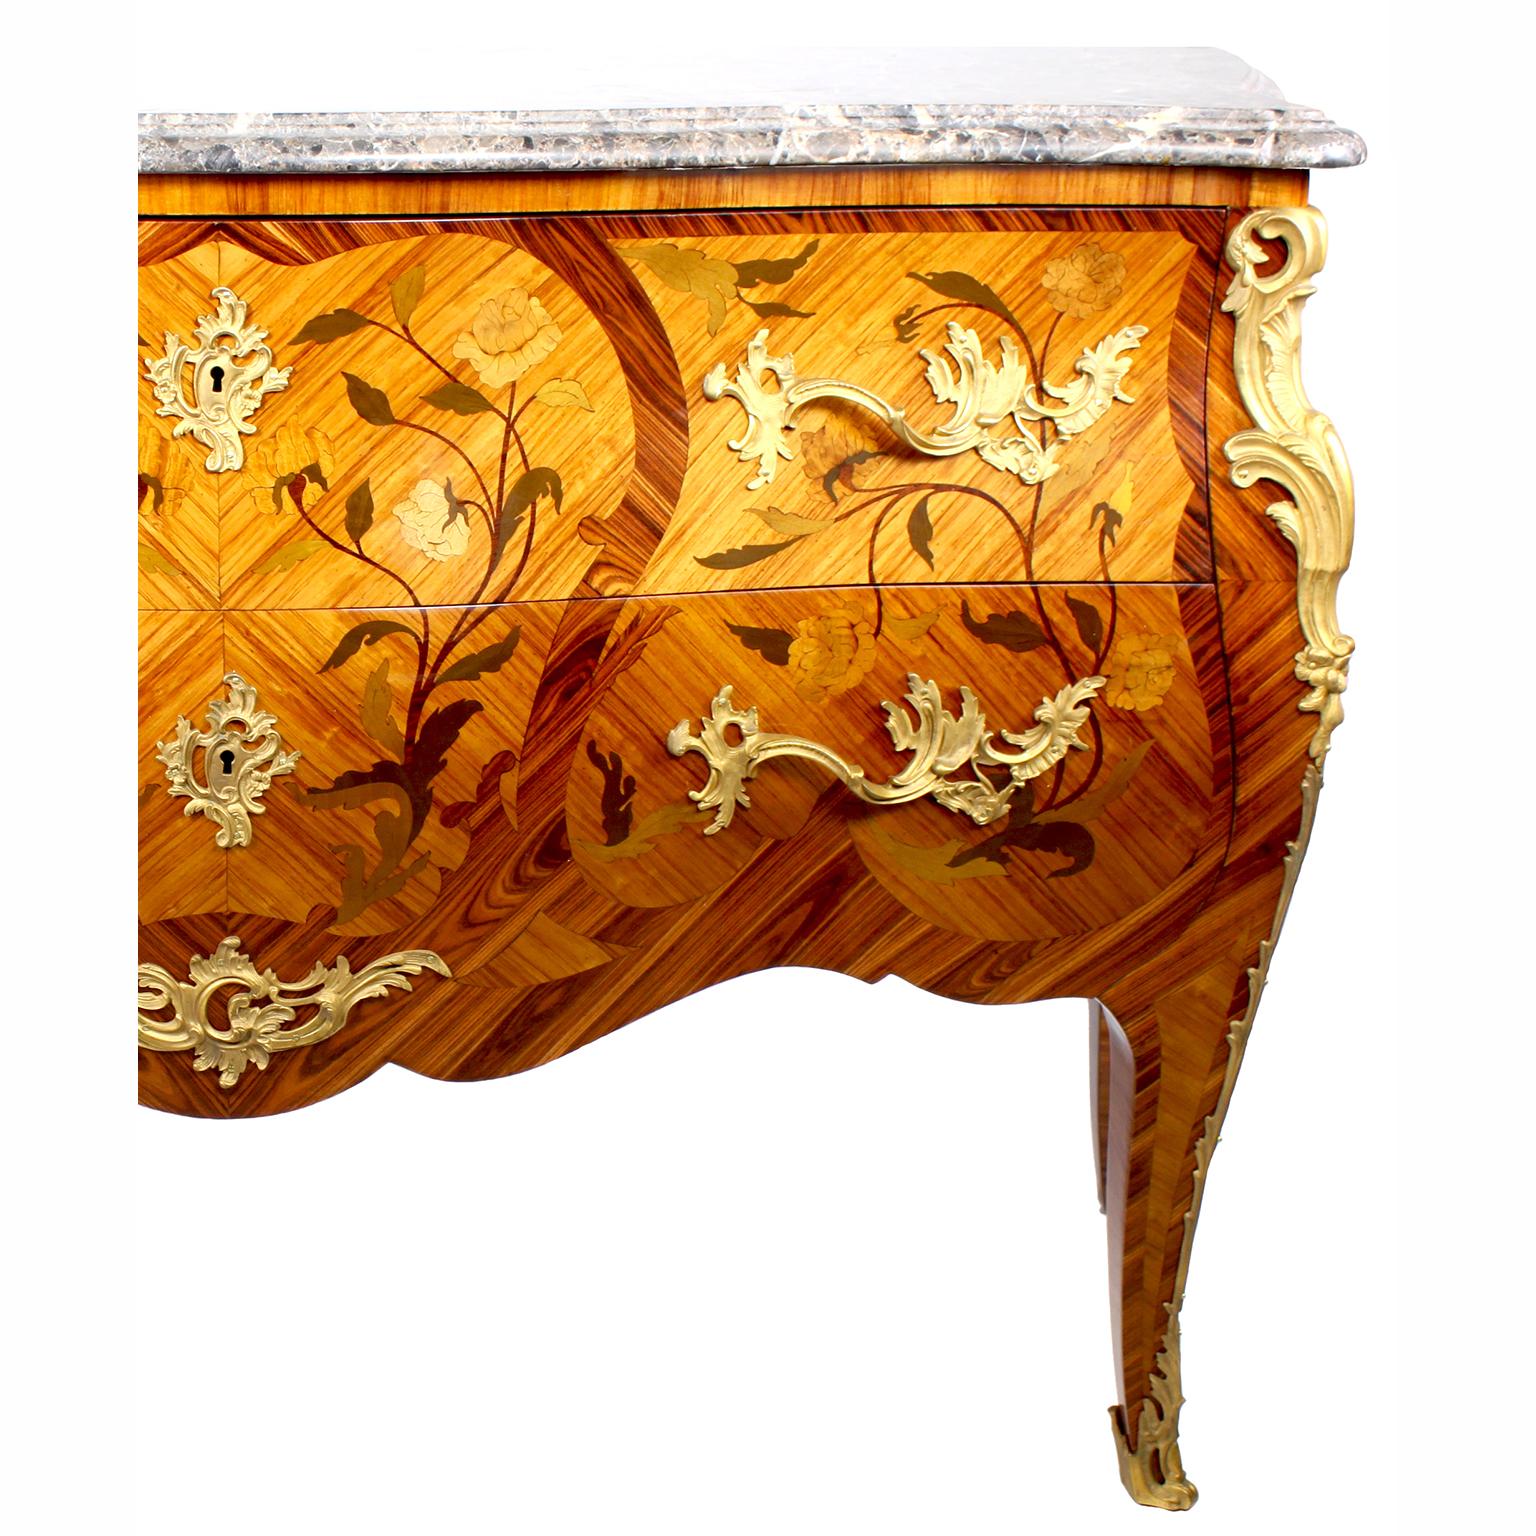 Gilt French Louis XV Style Bombé Satinwood Marquetry & Ormolu Mounted Commode For Sale